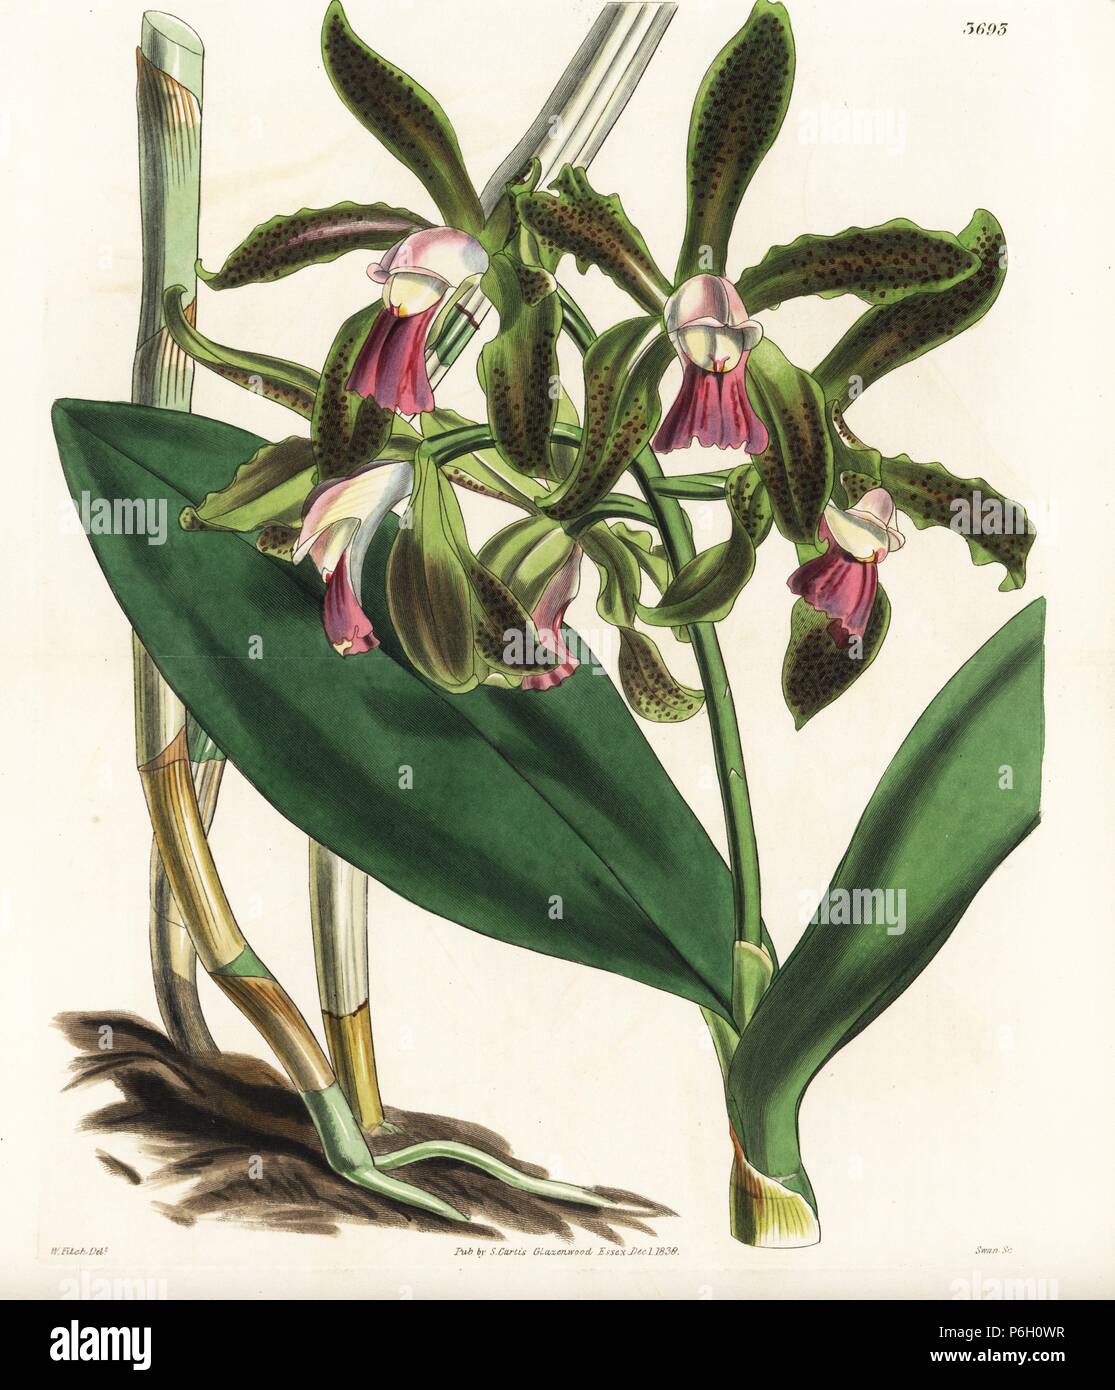 Lord Edward Russell's spotted cattleya orchid, Cattleya guttata. Handcoloured copperplate engraving after a botanical illustration by Walter Fitch from William Jackson Hooker's Botanical Magazine, London, 1838. Stock Photo